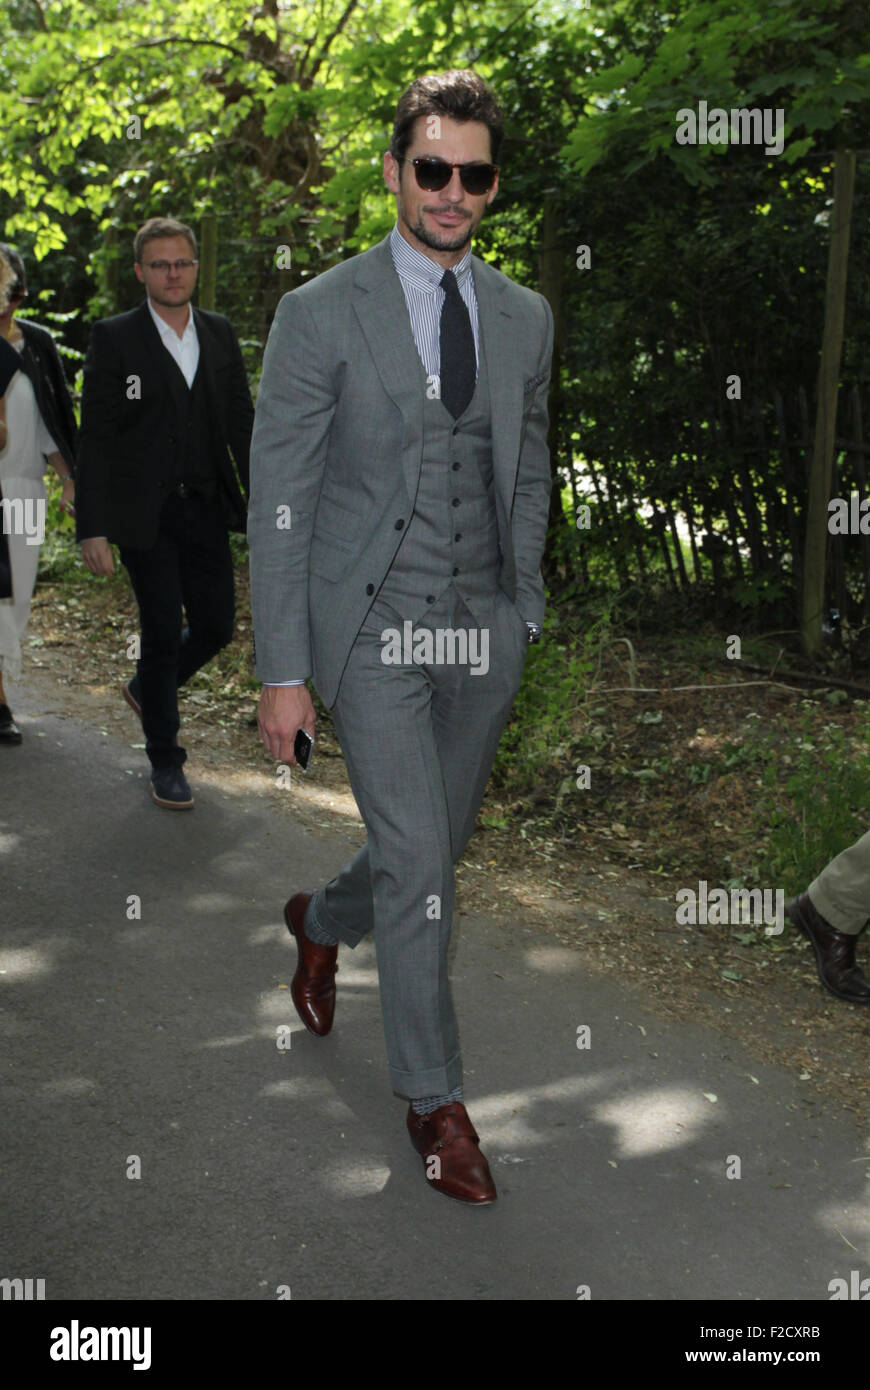 London, UK, 15th June 2015: David Gandy attends the Burberry Prorsum fashion show, London Collections: Men, Spring Summer 2016 i Stock Photo